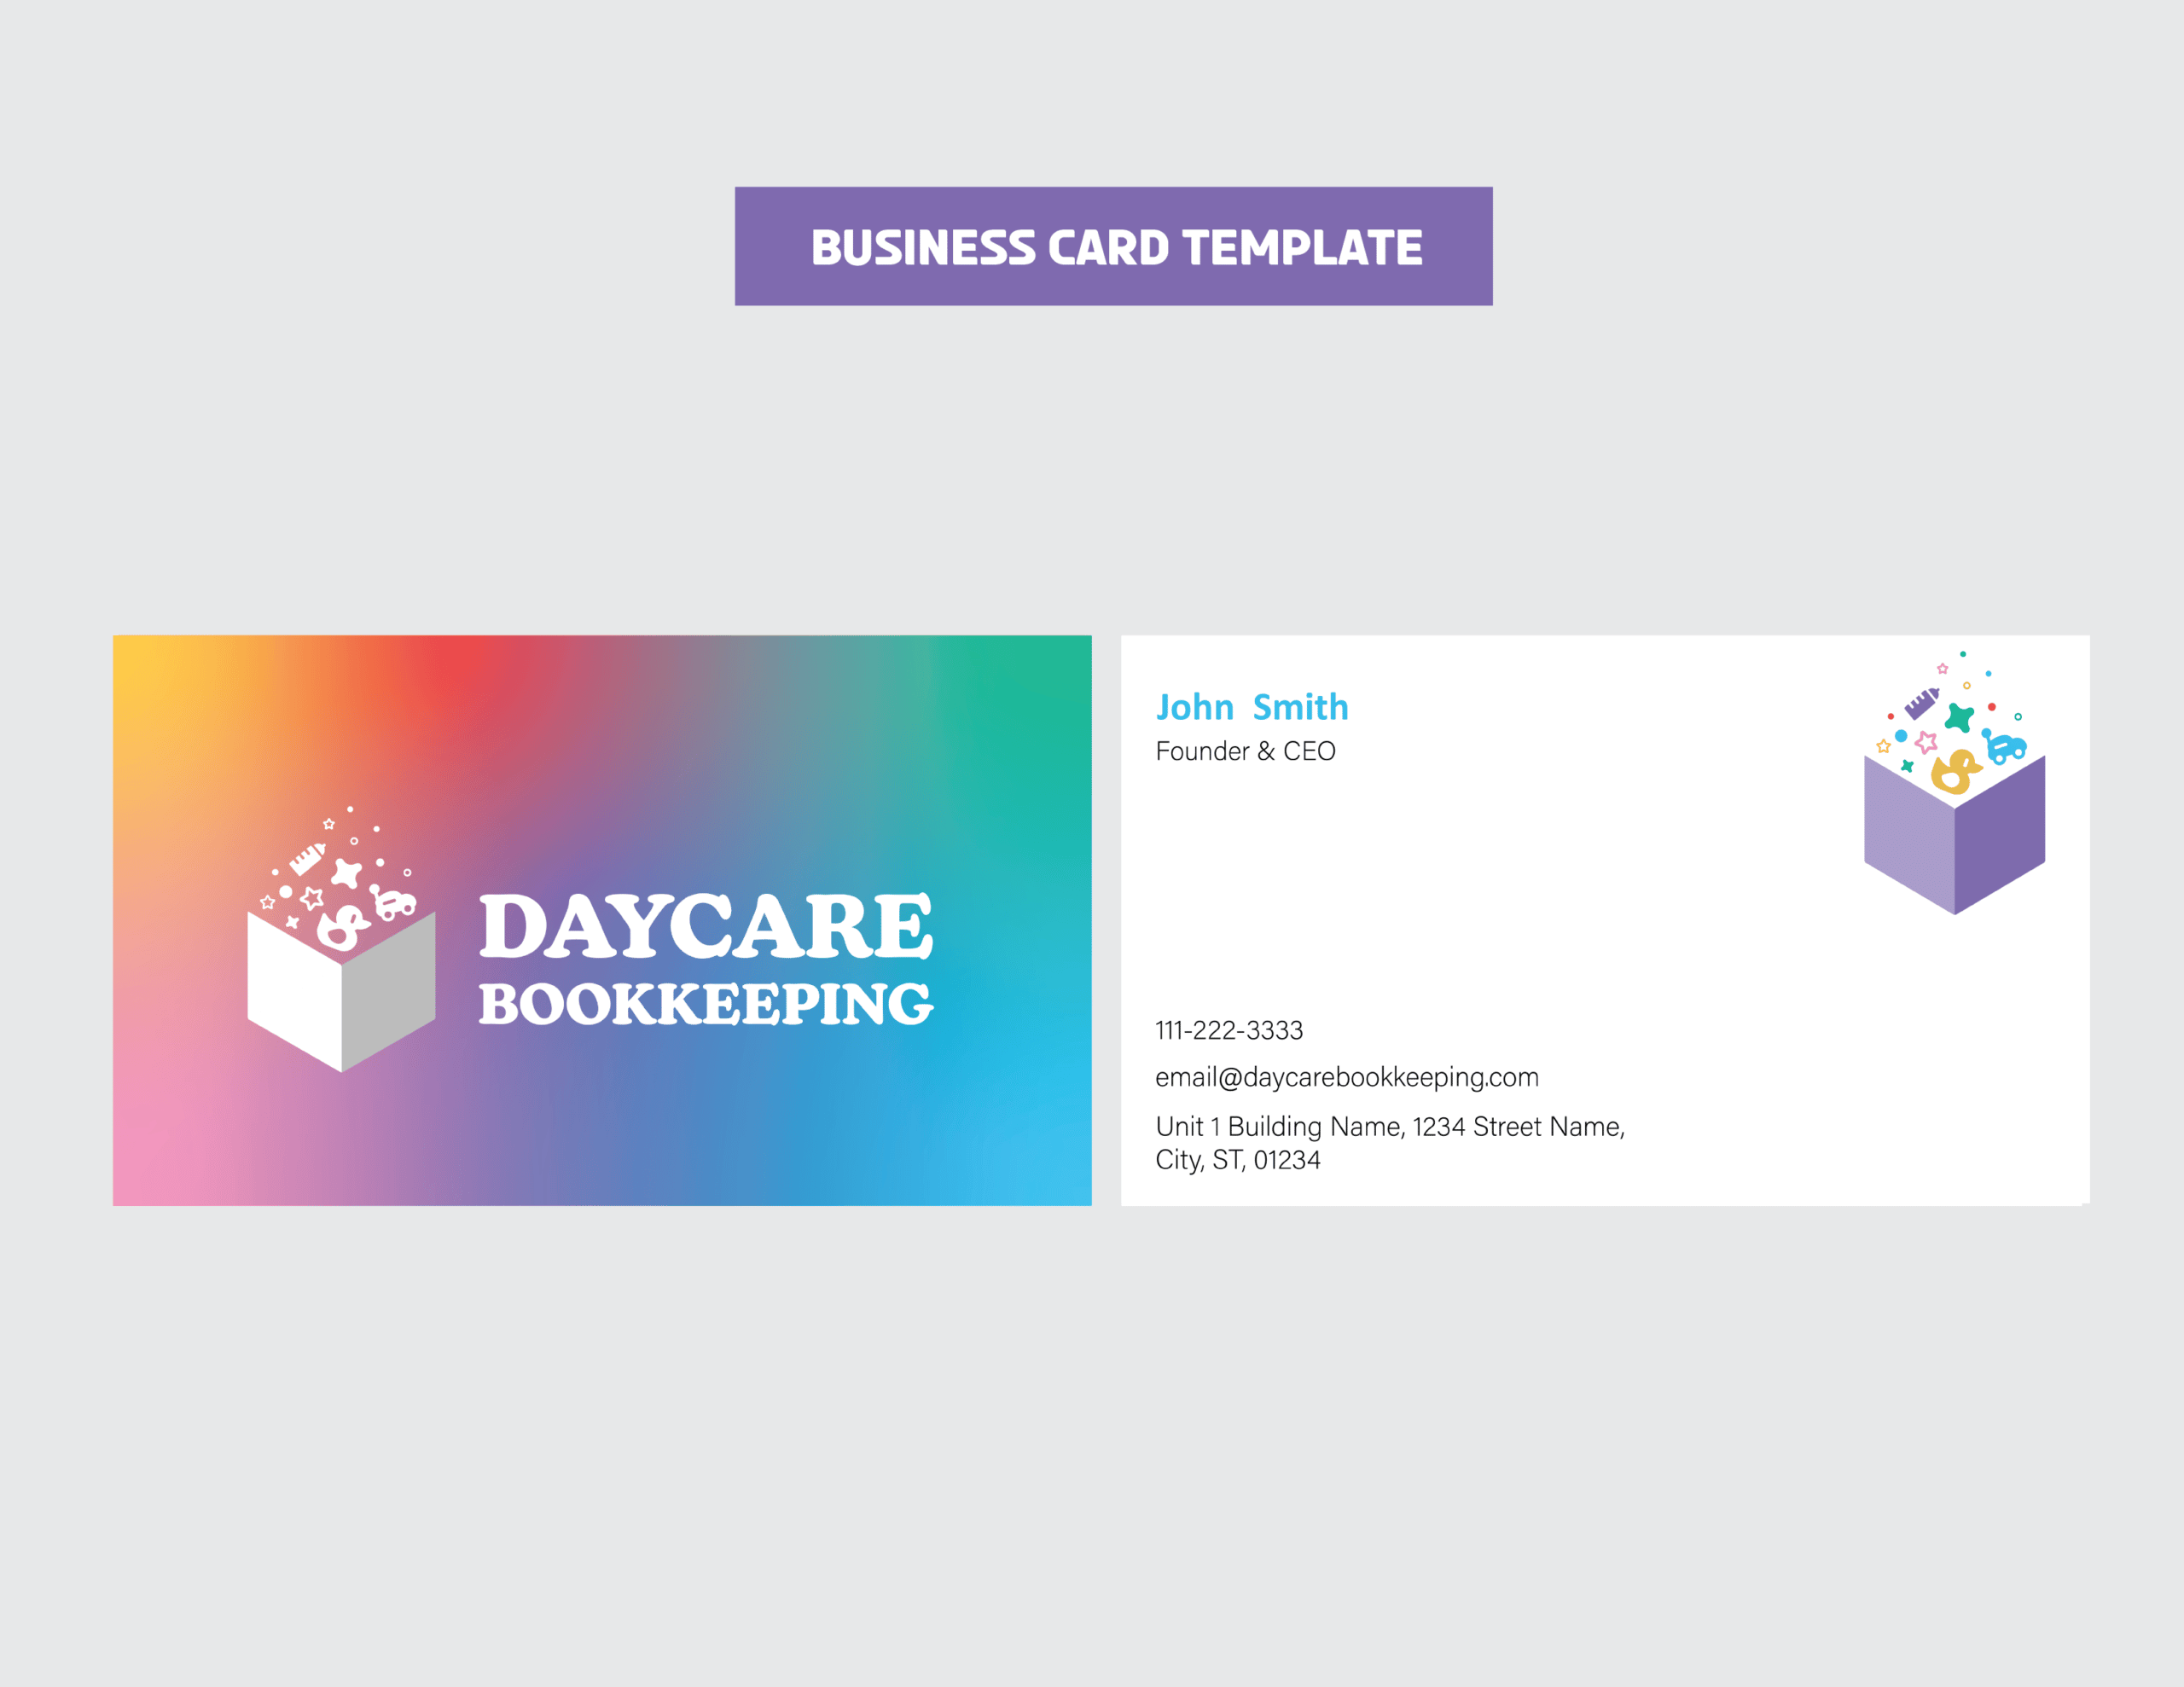 04_DaycareBookkeeping_Business Card Template